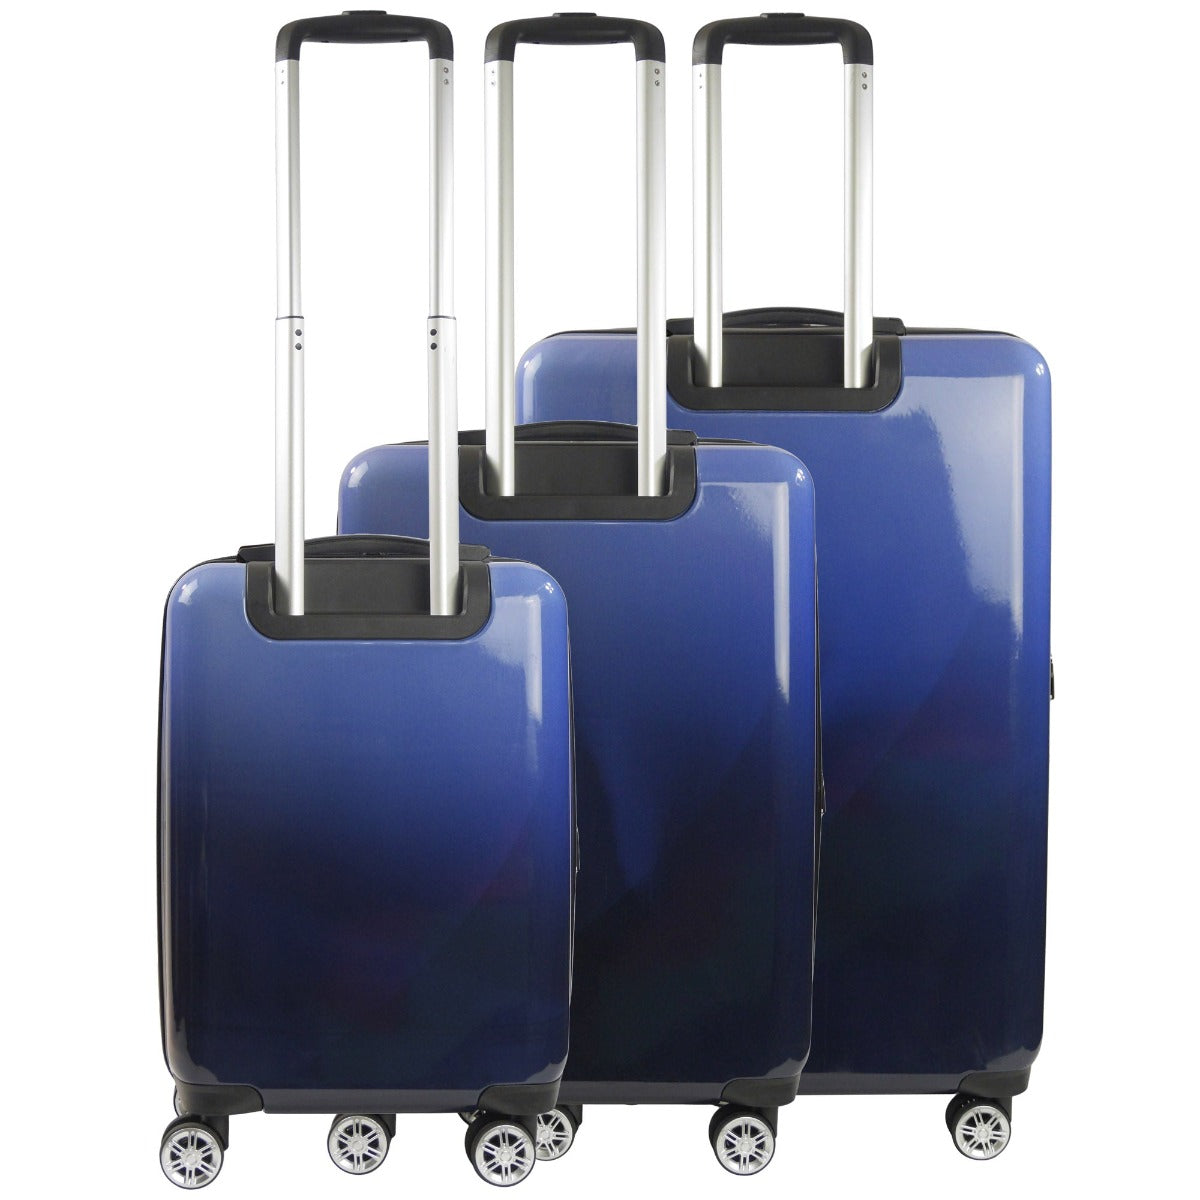 Ful Impulse Ombre Hard-sided Spinner Suitcases Luggage 3pc set, Blue